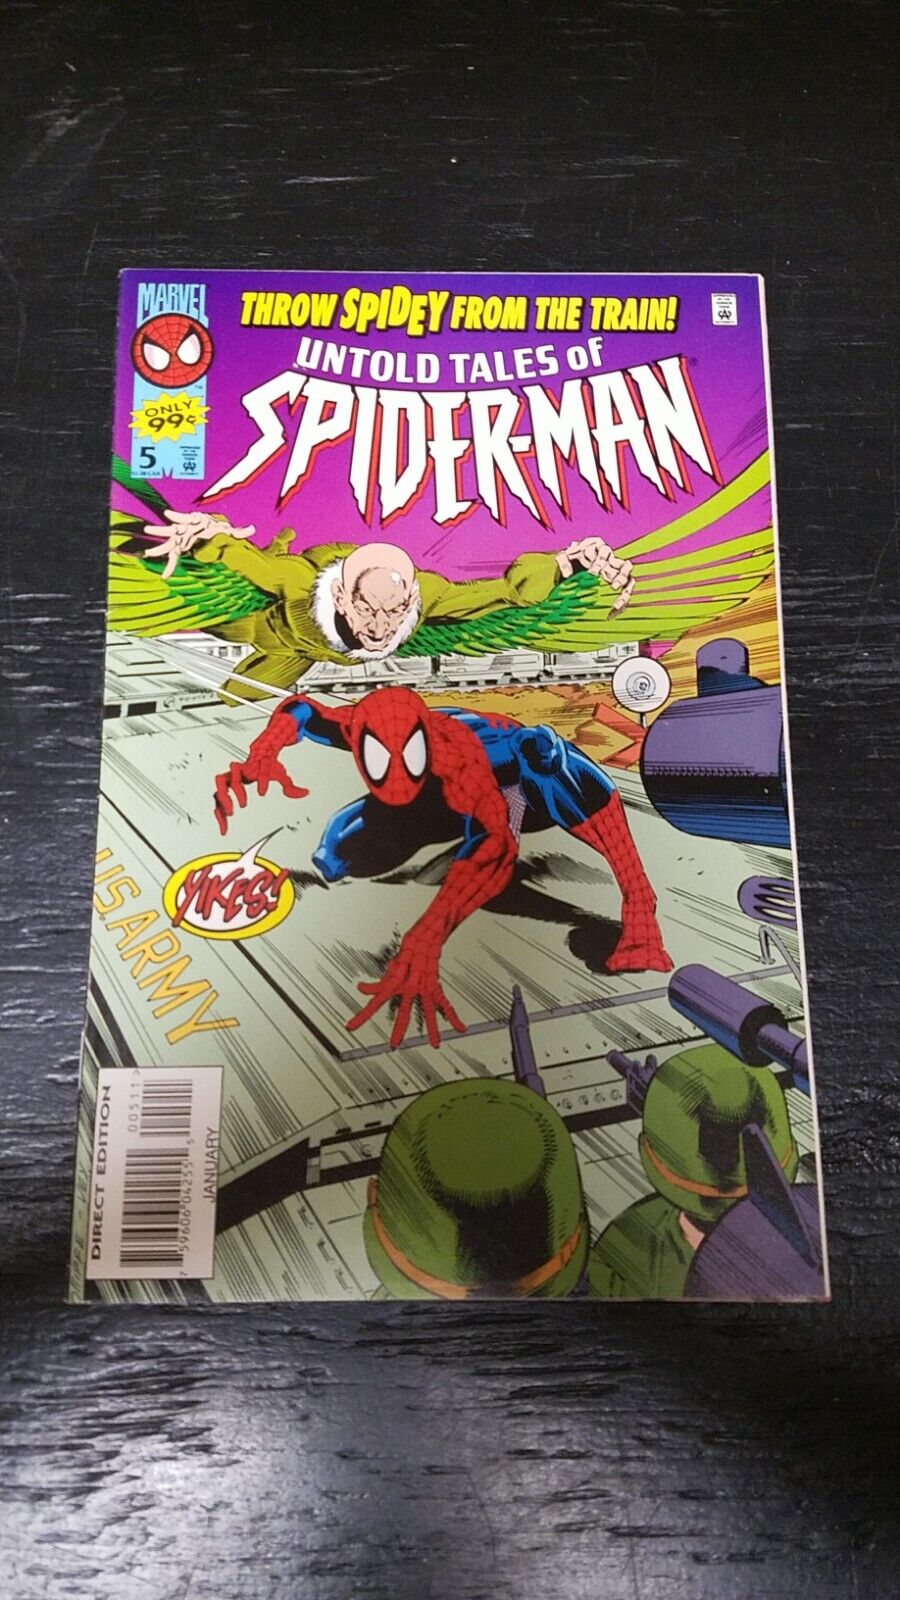 MARVEL COMICS UNTOLD TALES OF SPIDER-MAN #5-25 MULTIPLE ISSUES/COVERS AVAILABLE